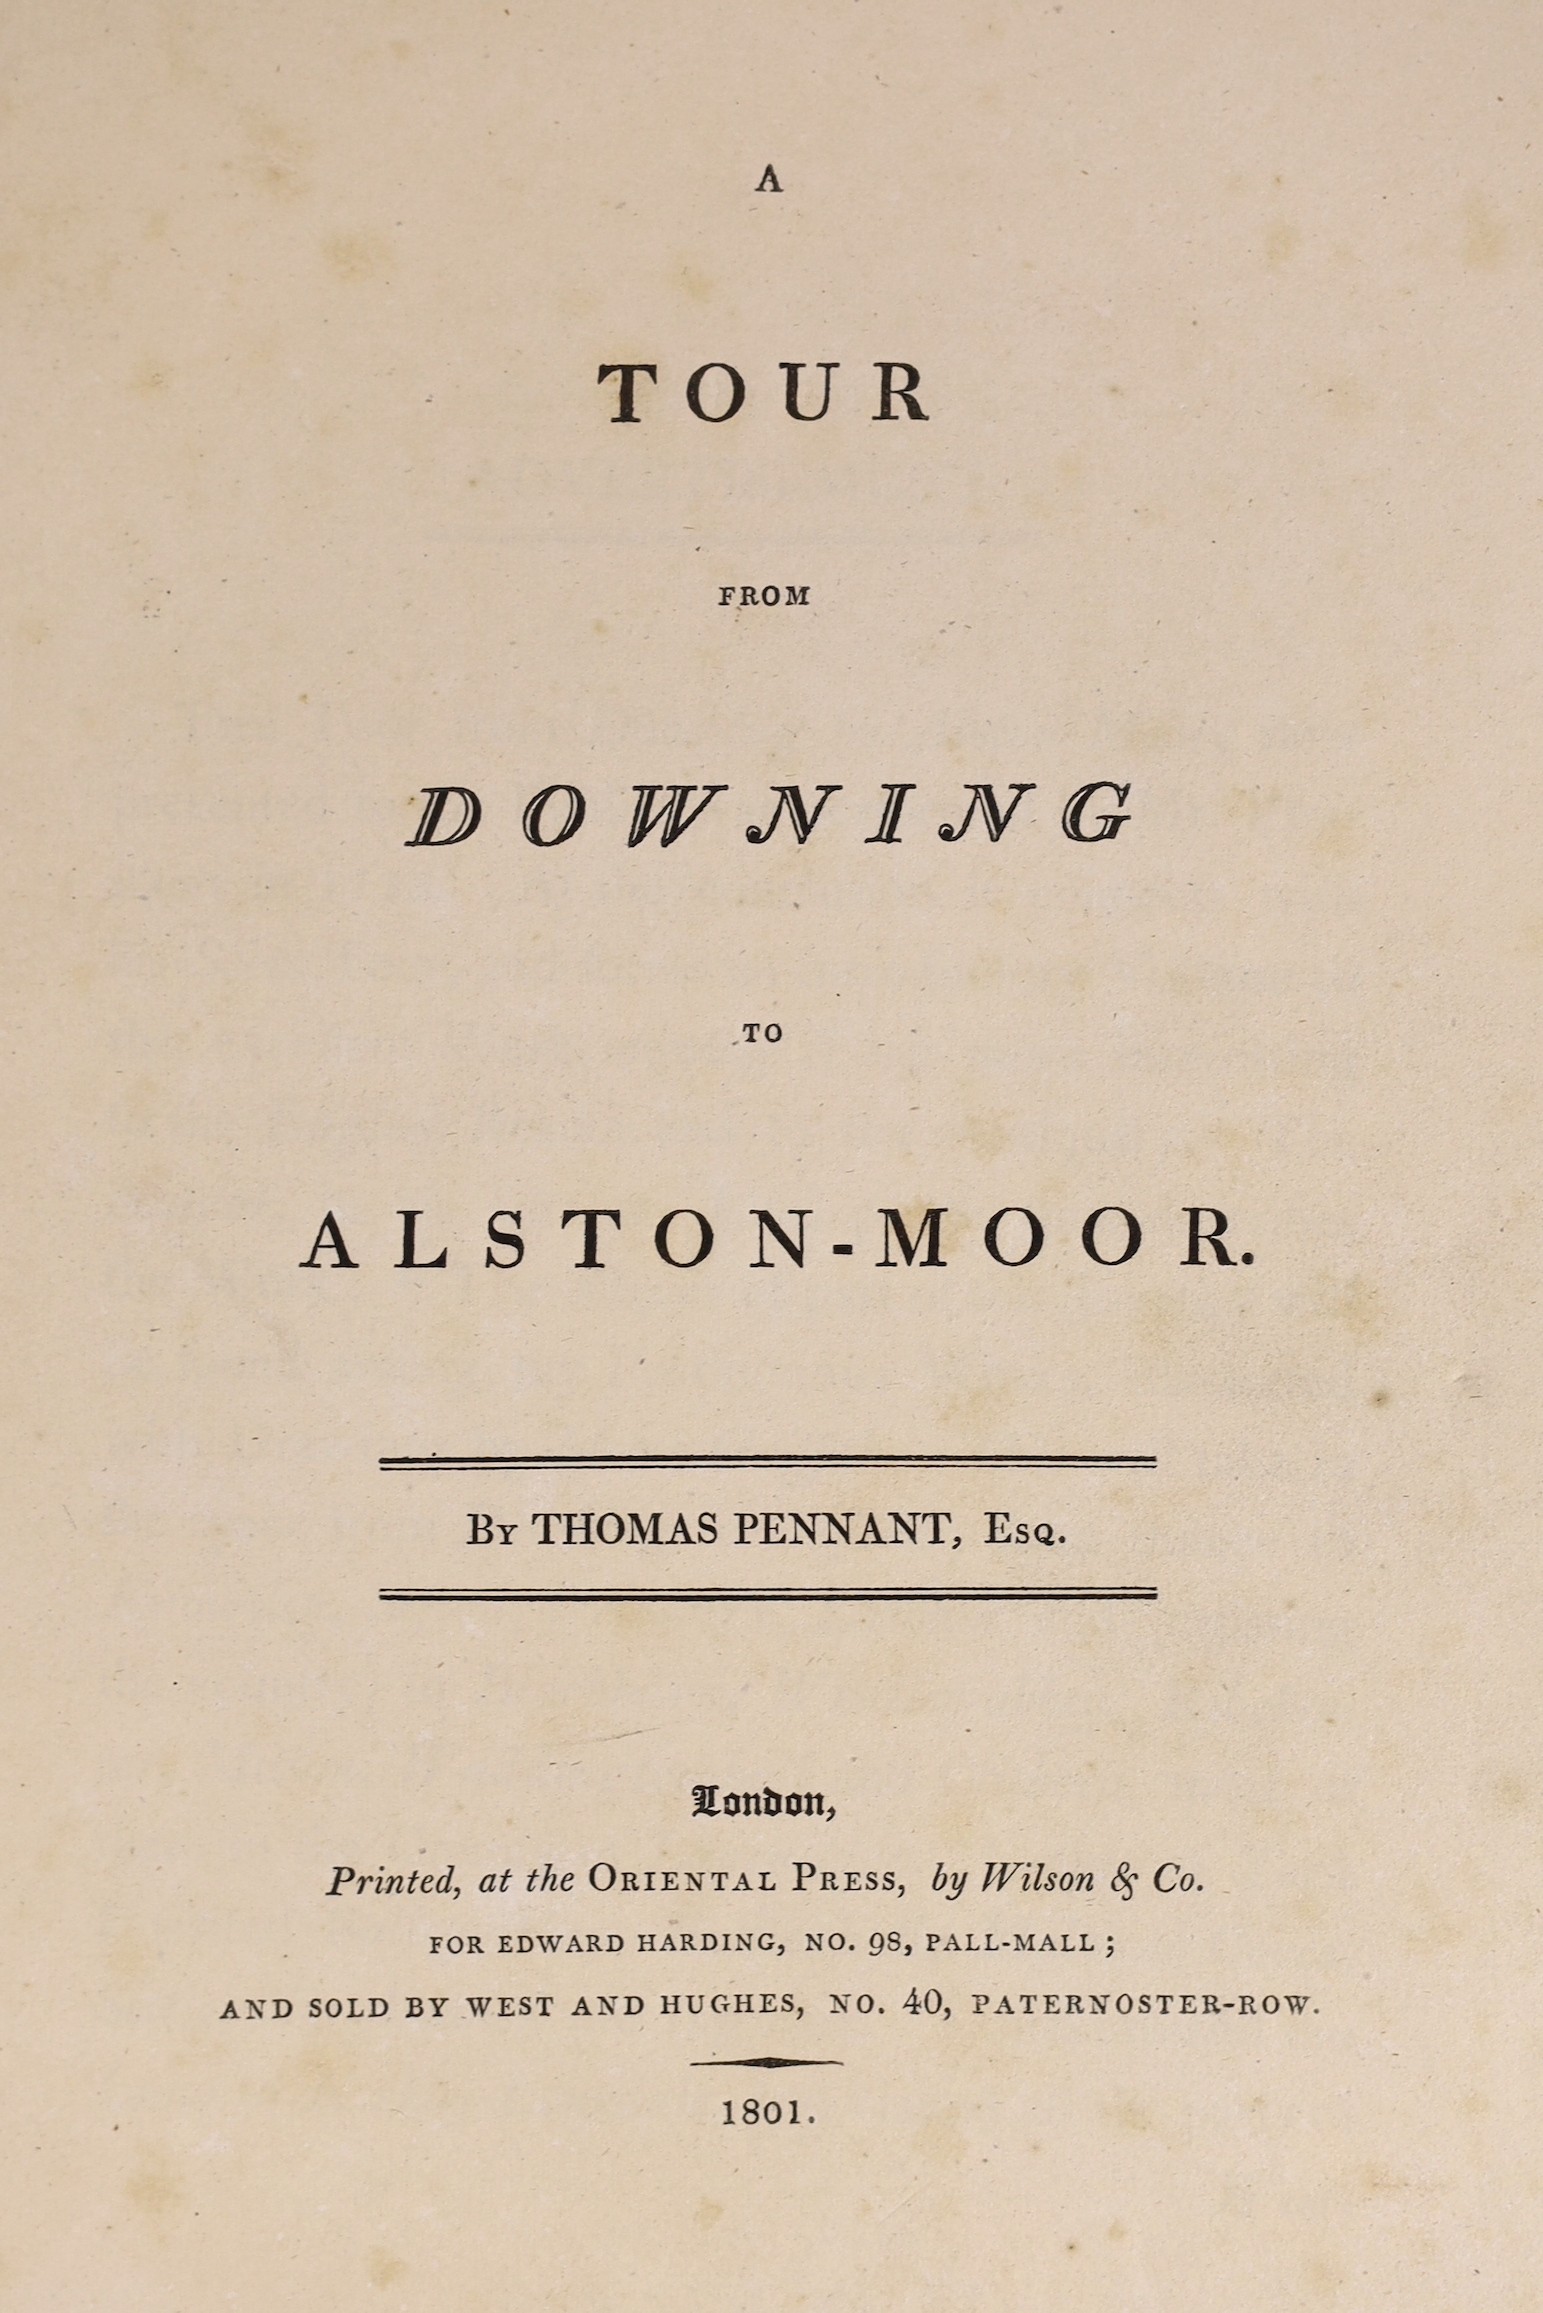 ALSTON-MOOR - Pennant, Thomas - A Tour from Downing to Alston-Moor, 1st edition, 4to, rebound half calf, with 27 plates, Edward Harding, London, 1801